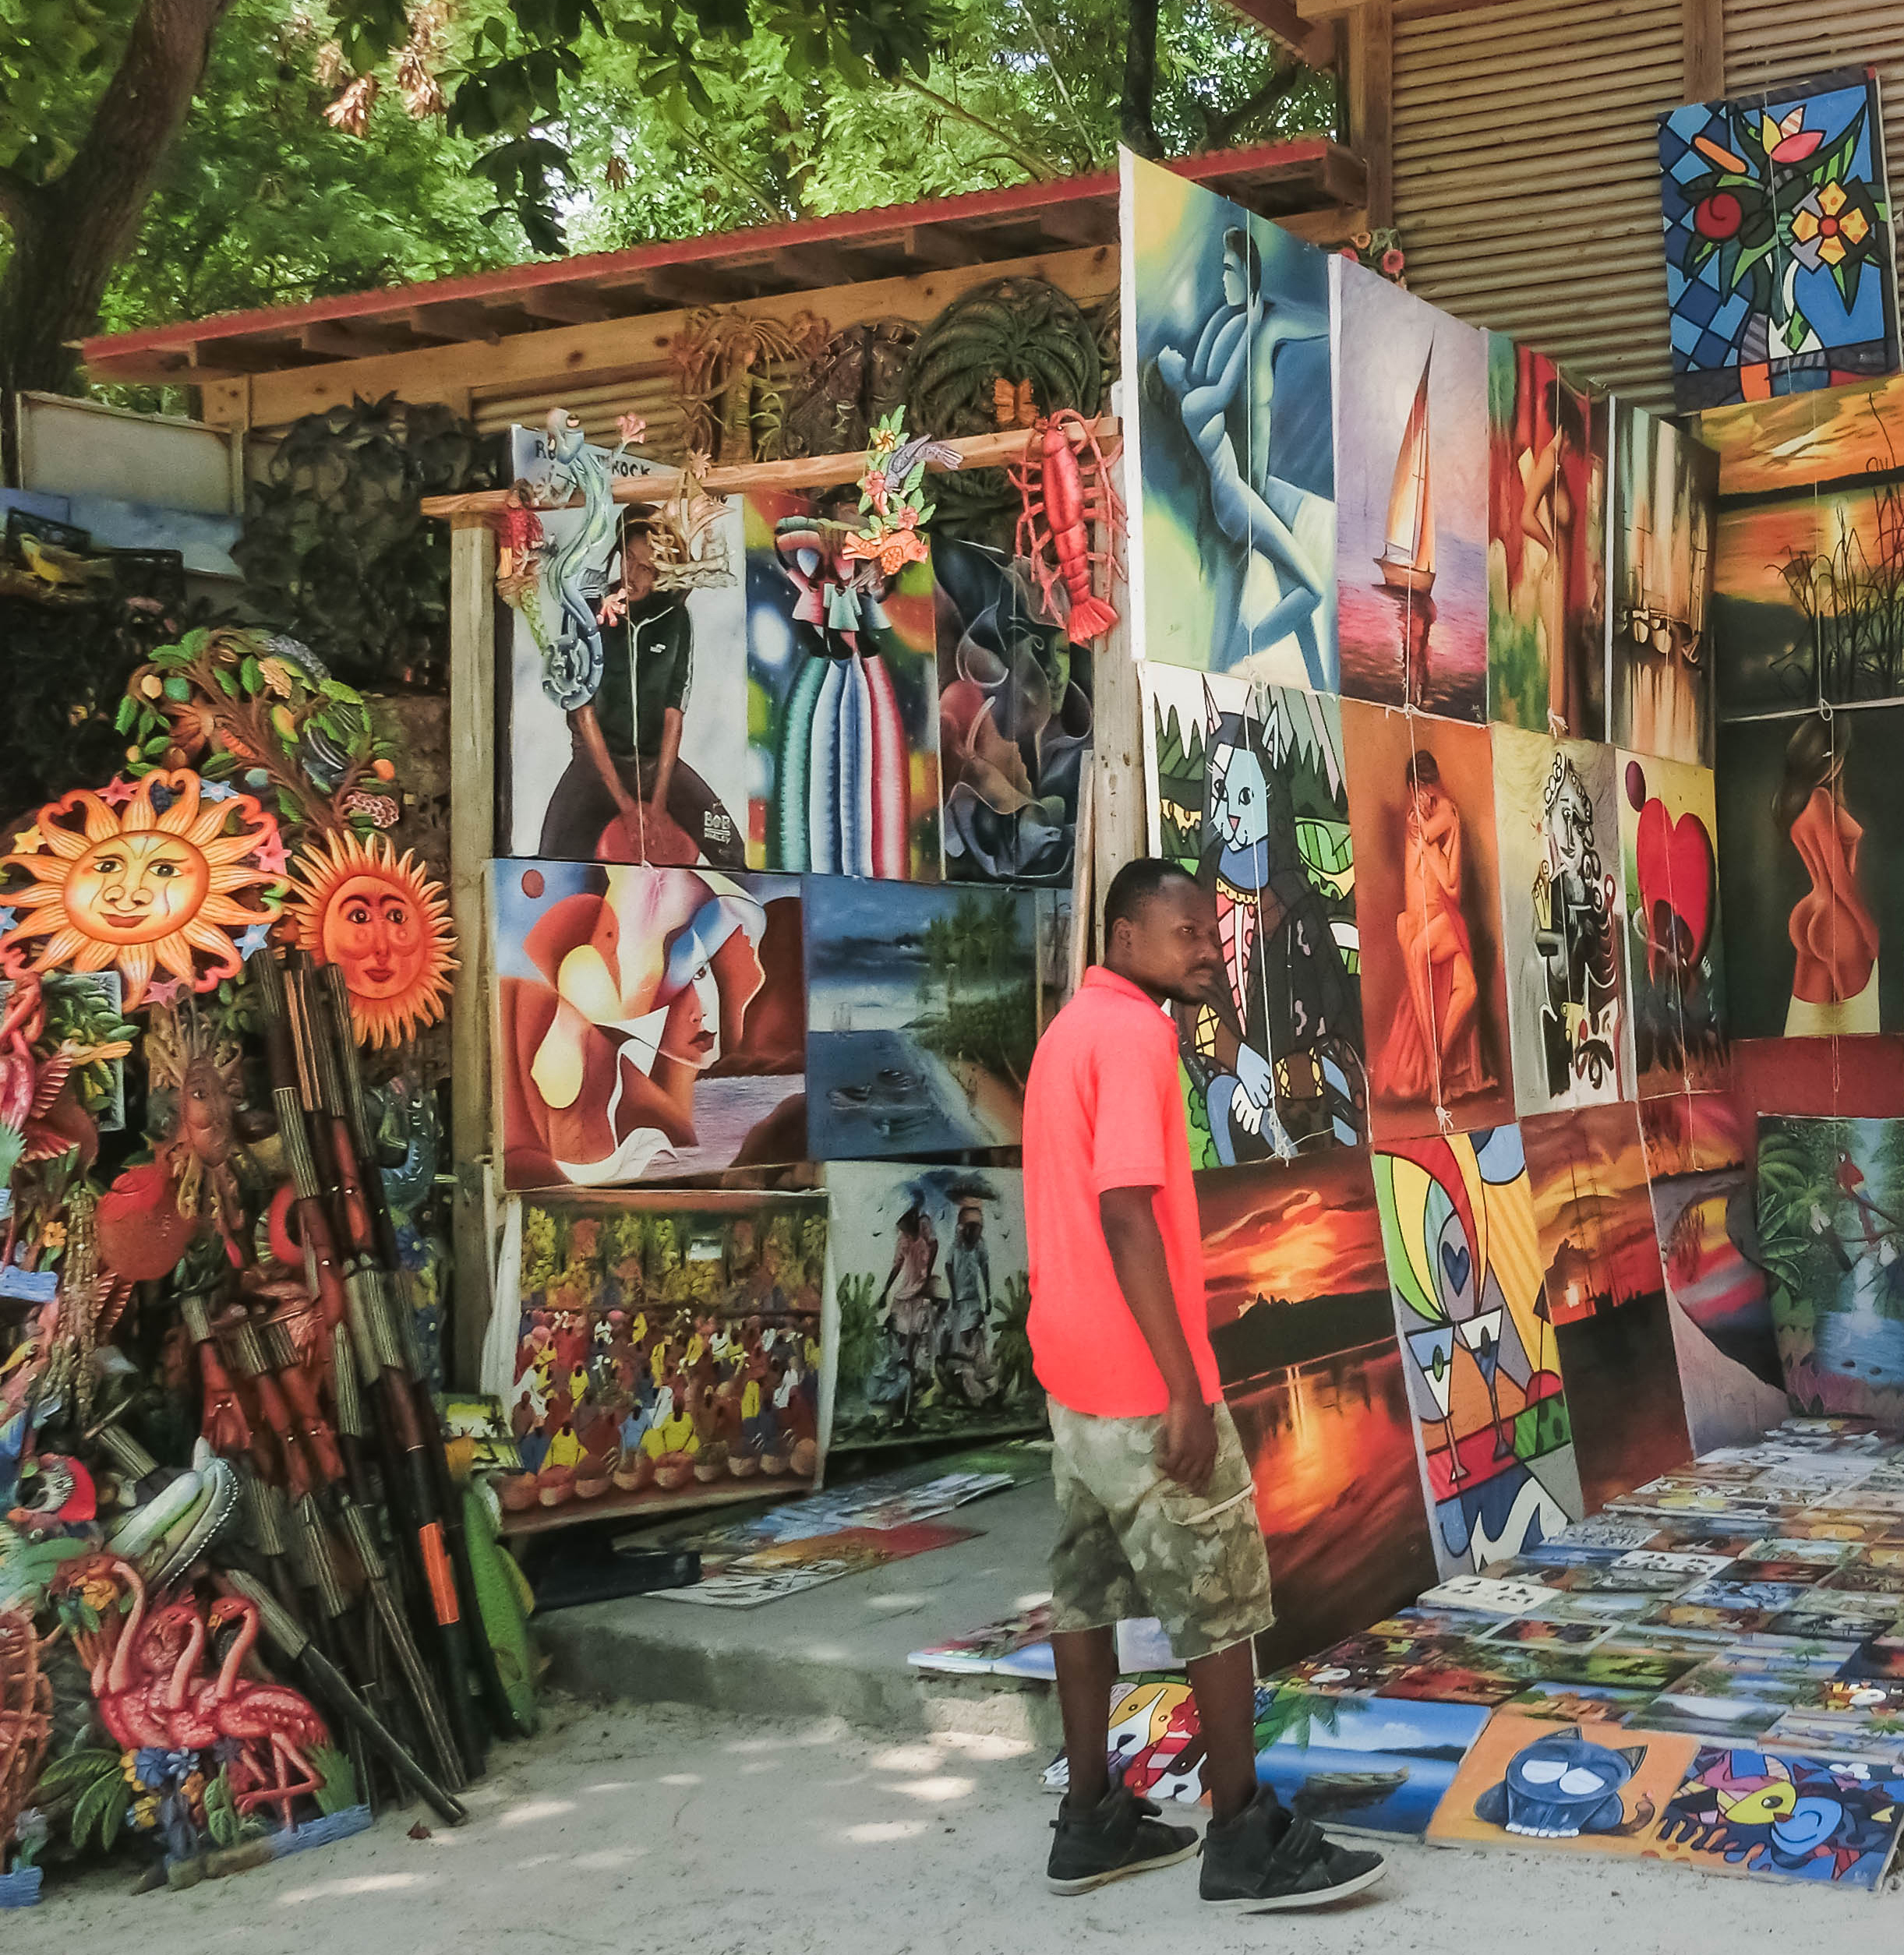 Art vendor stands by outdoor stall with several paintings hung up